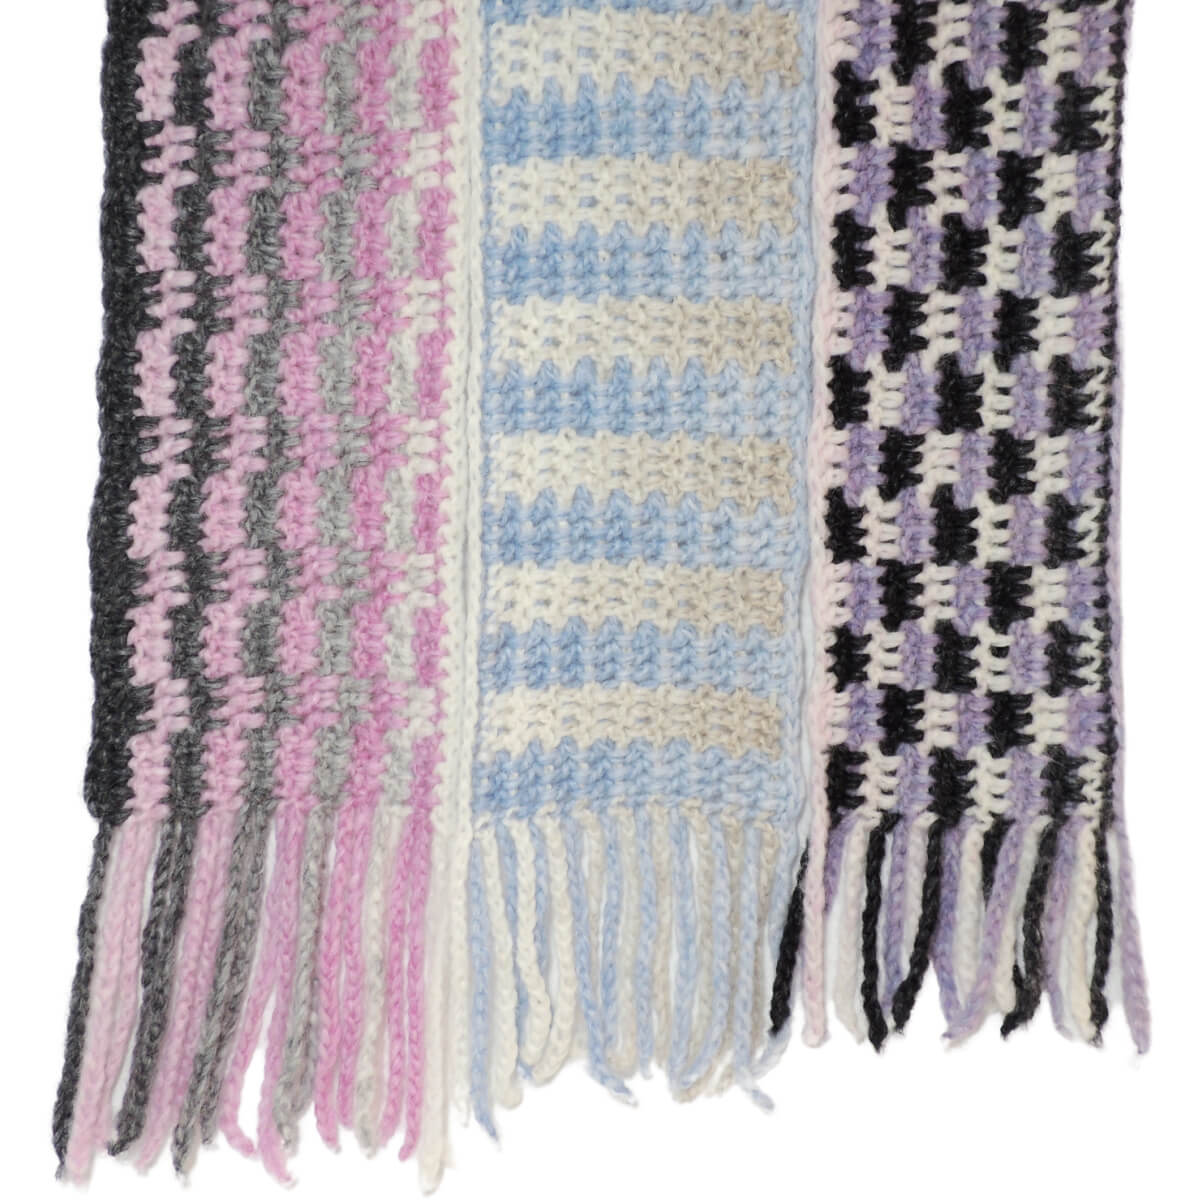 Image of the ends of 3 hanging scarves